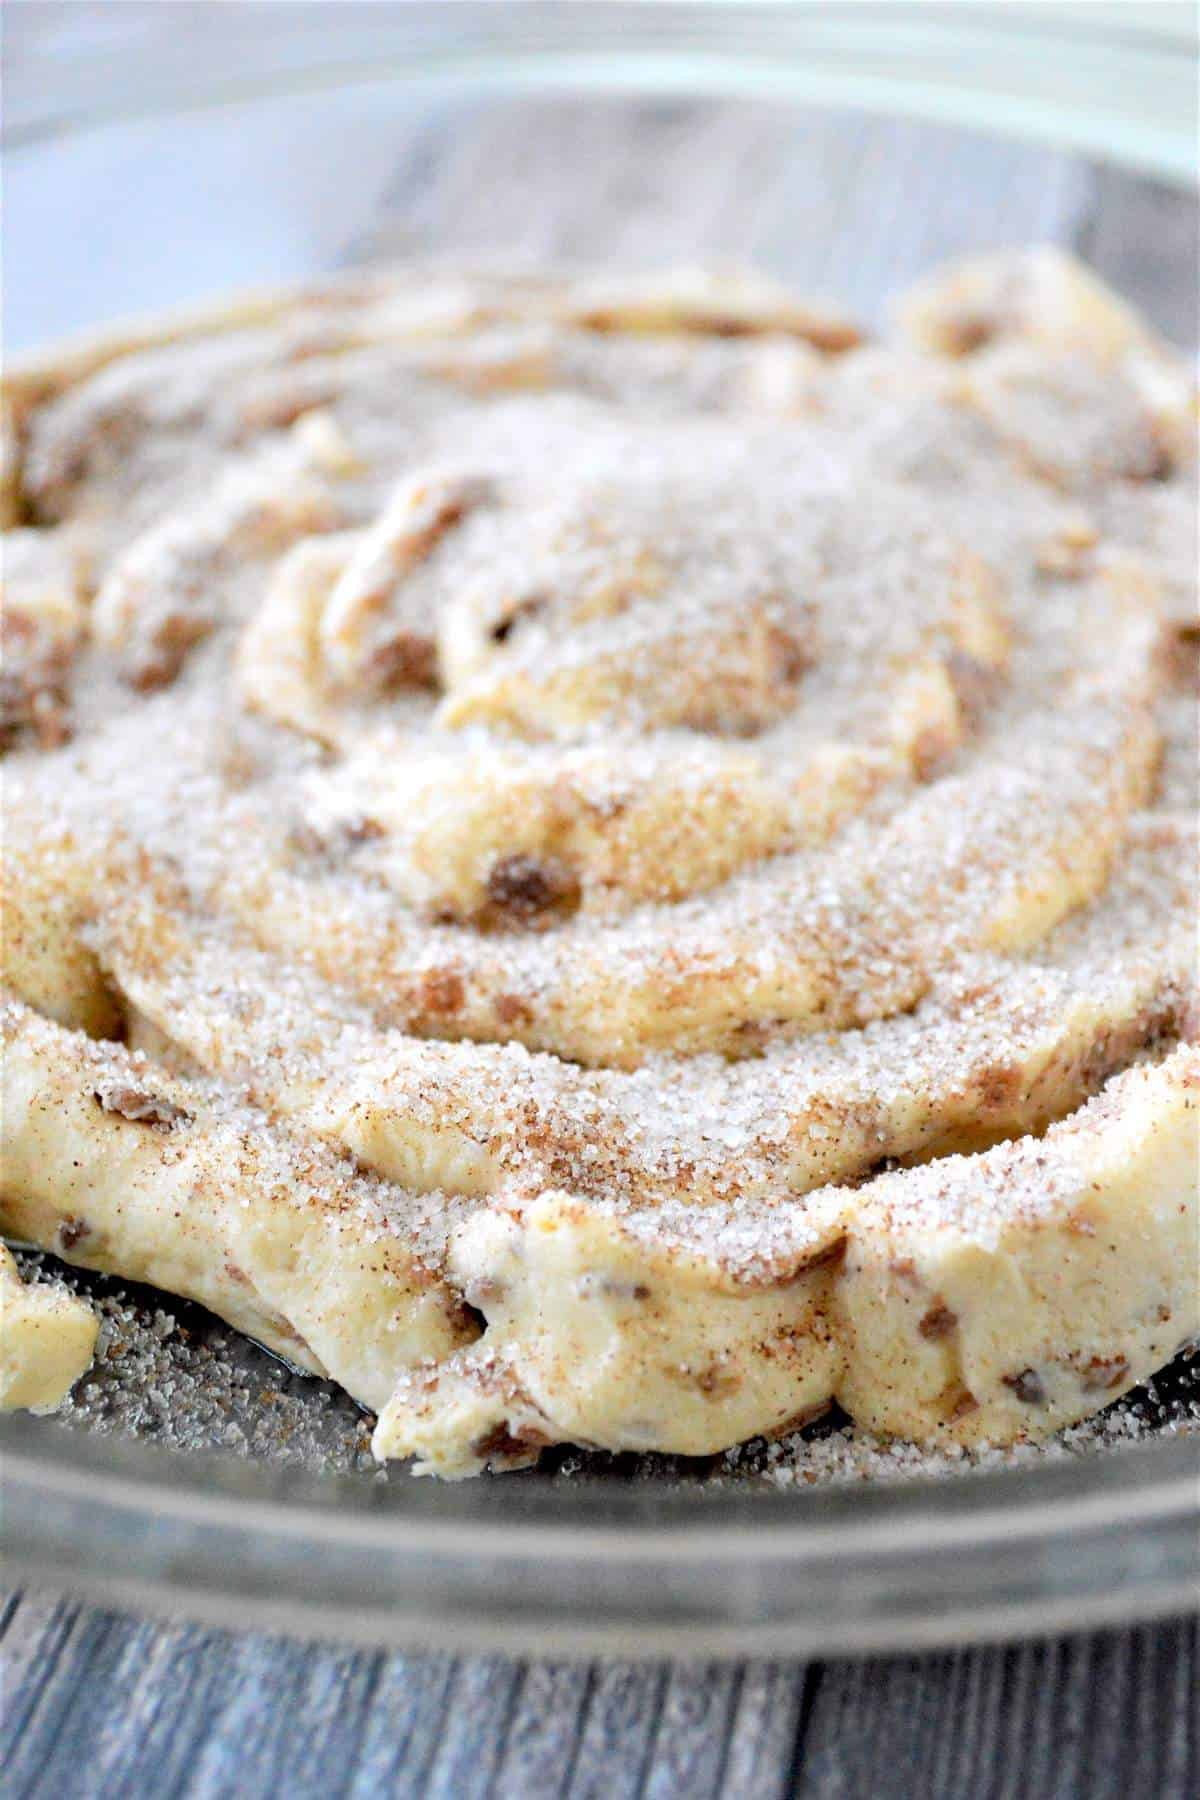 An unbaked giant cinnamon roll in a baking dish covered in cinnamon sugar.